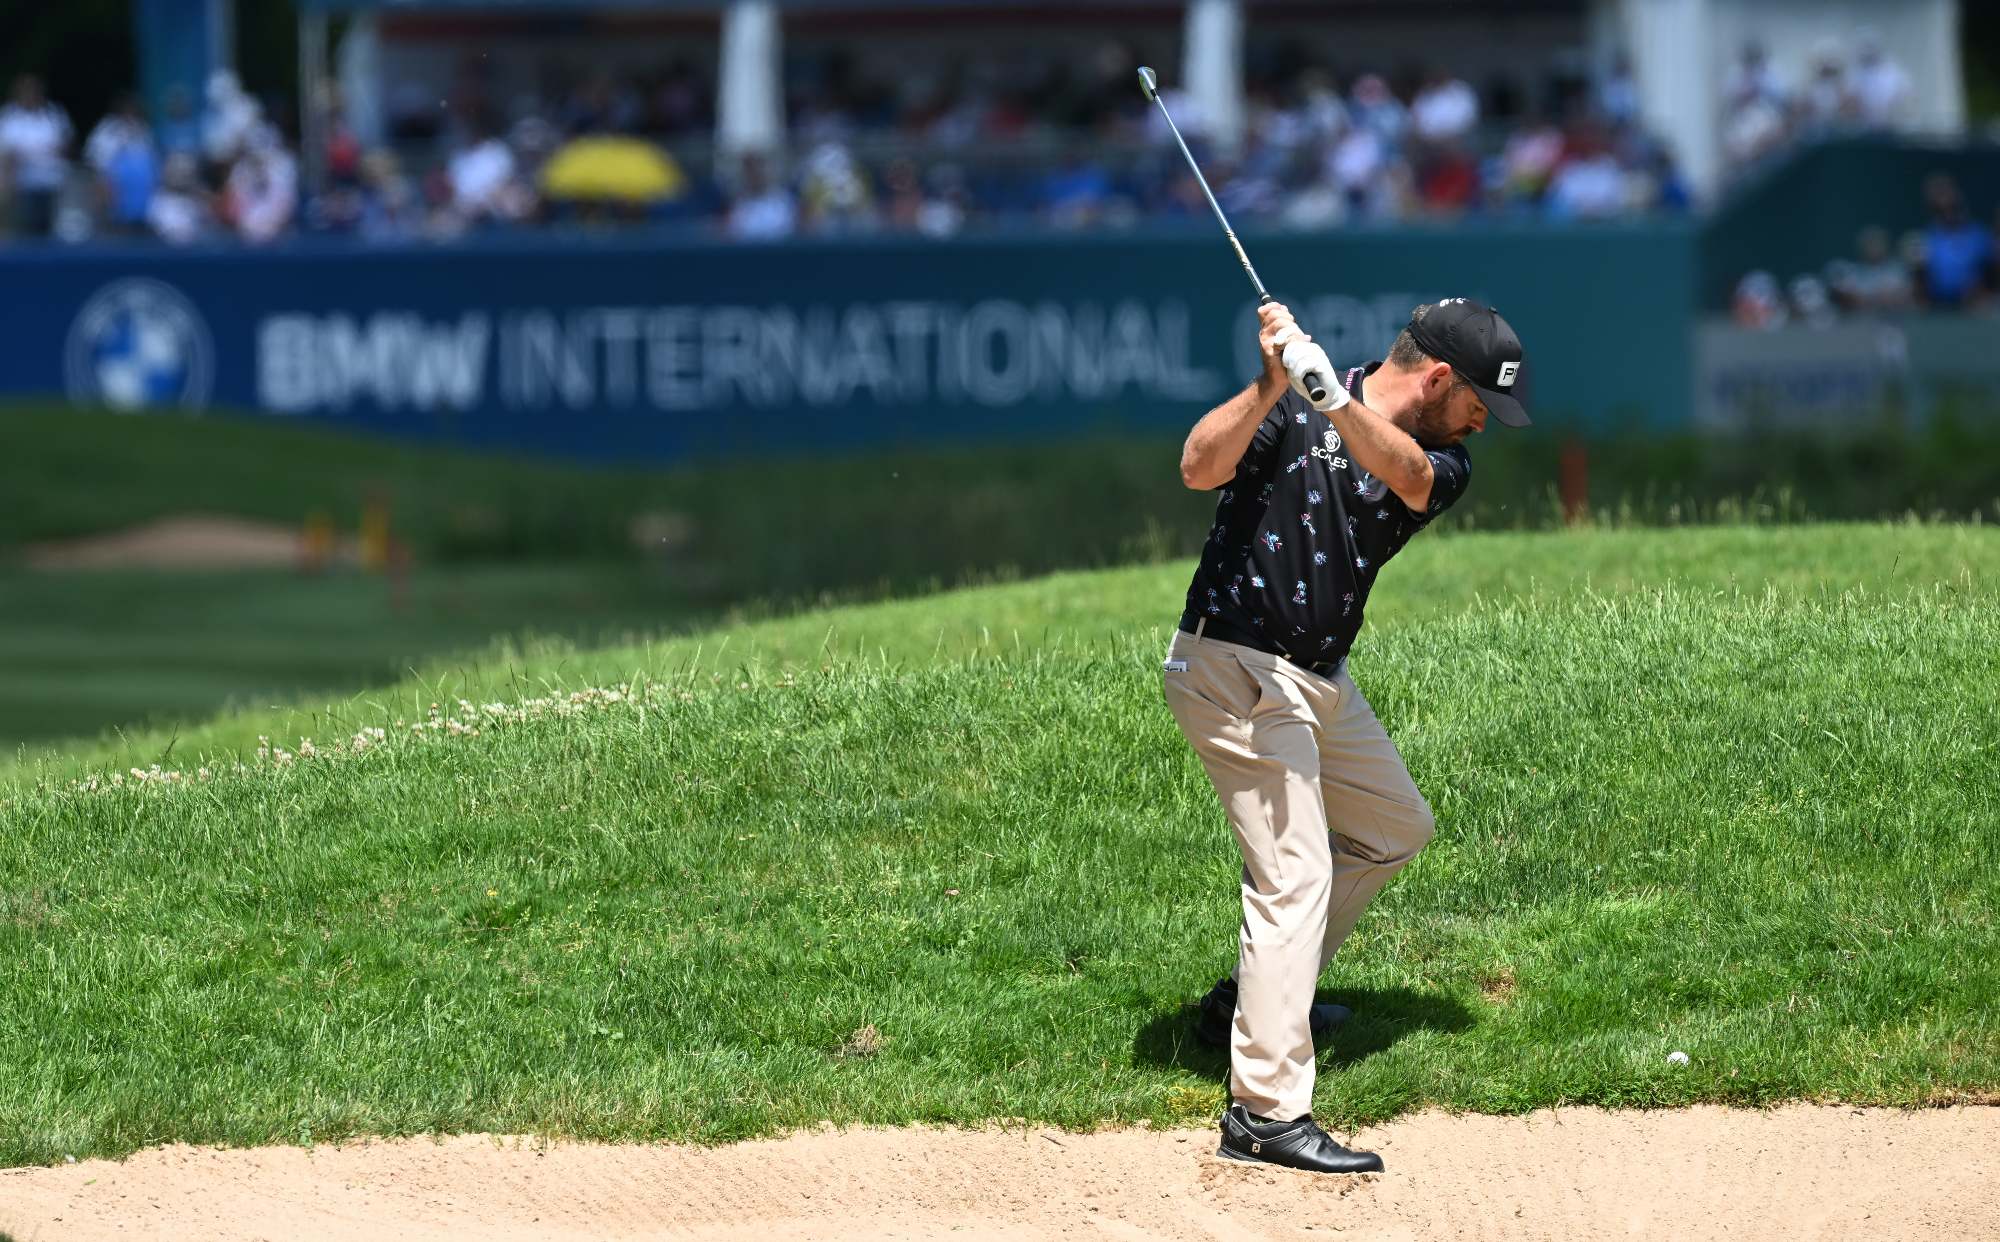 LIV golfers banned from Scottish Open, DP World Tour confirms